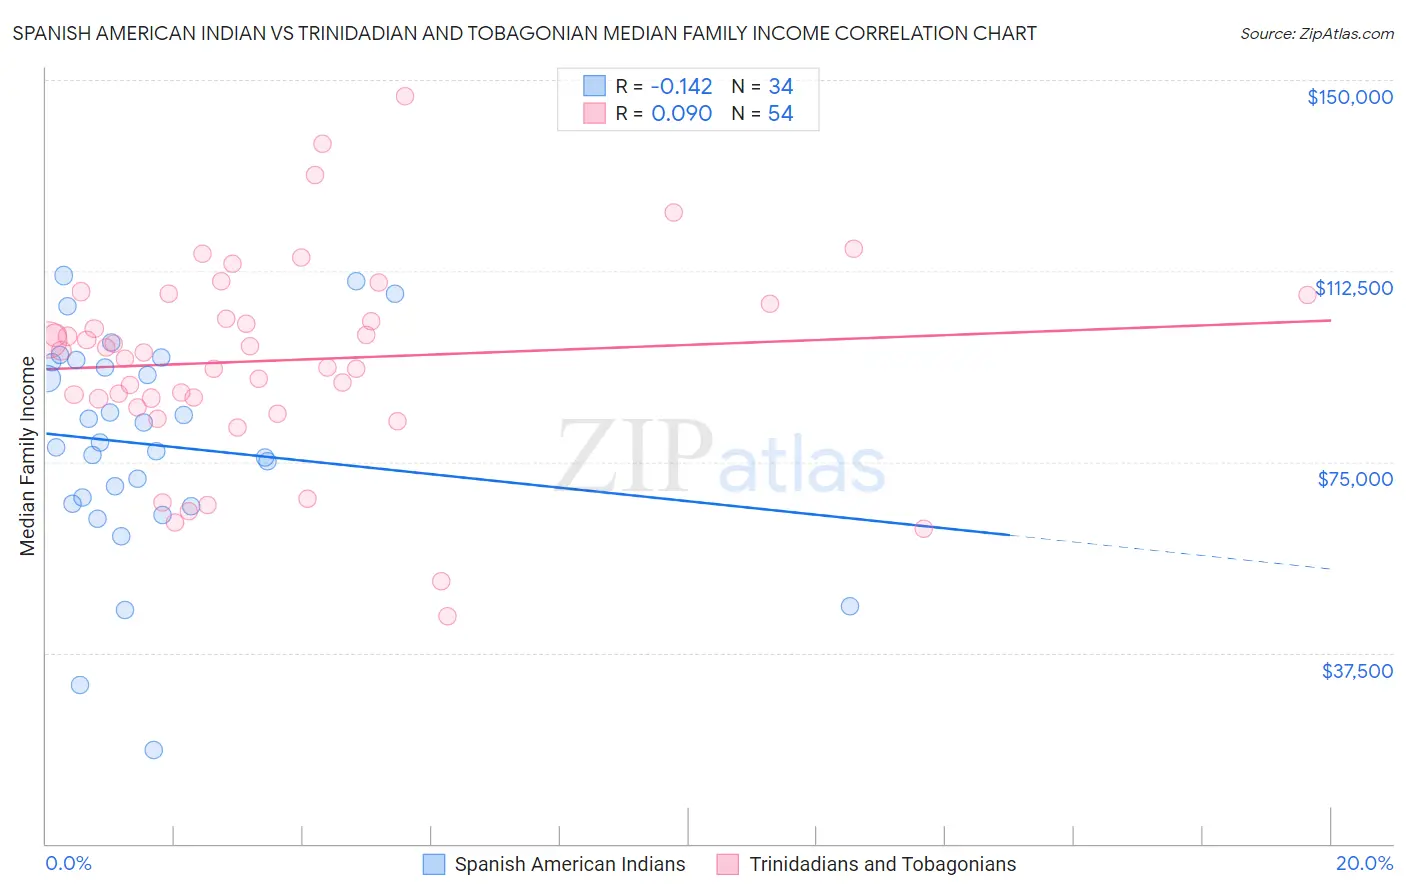 Spanish American Indian vs Trinidadian and Tobagonian Median Family Income